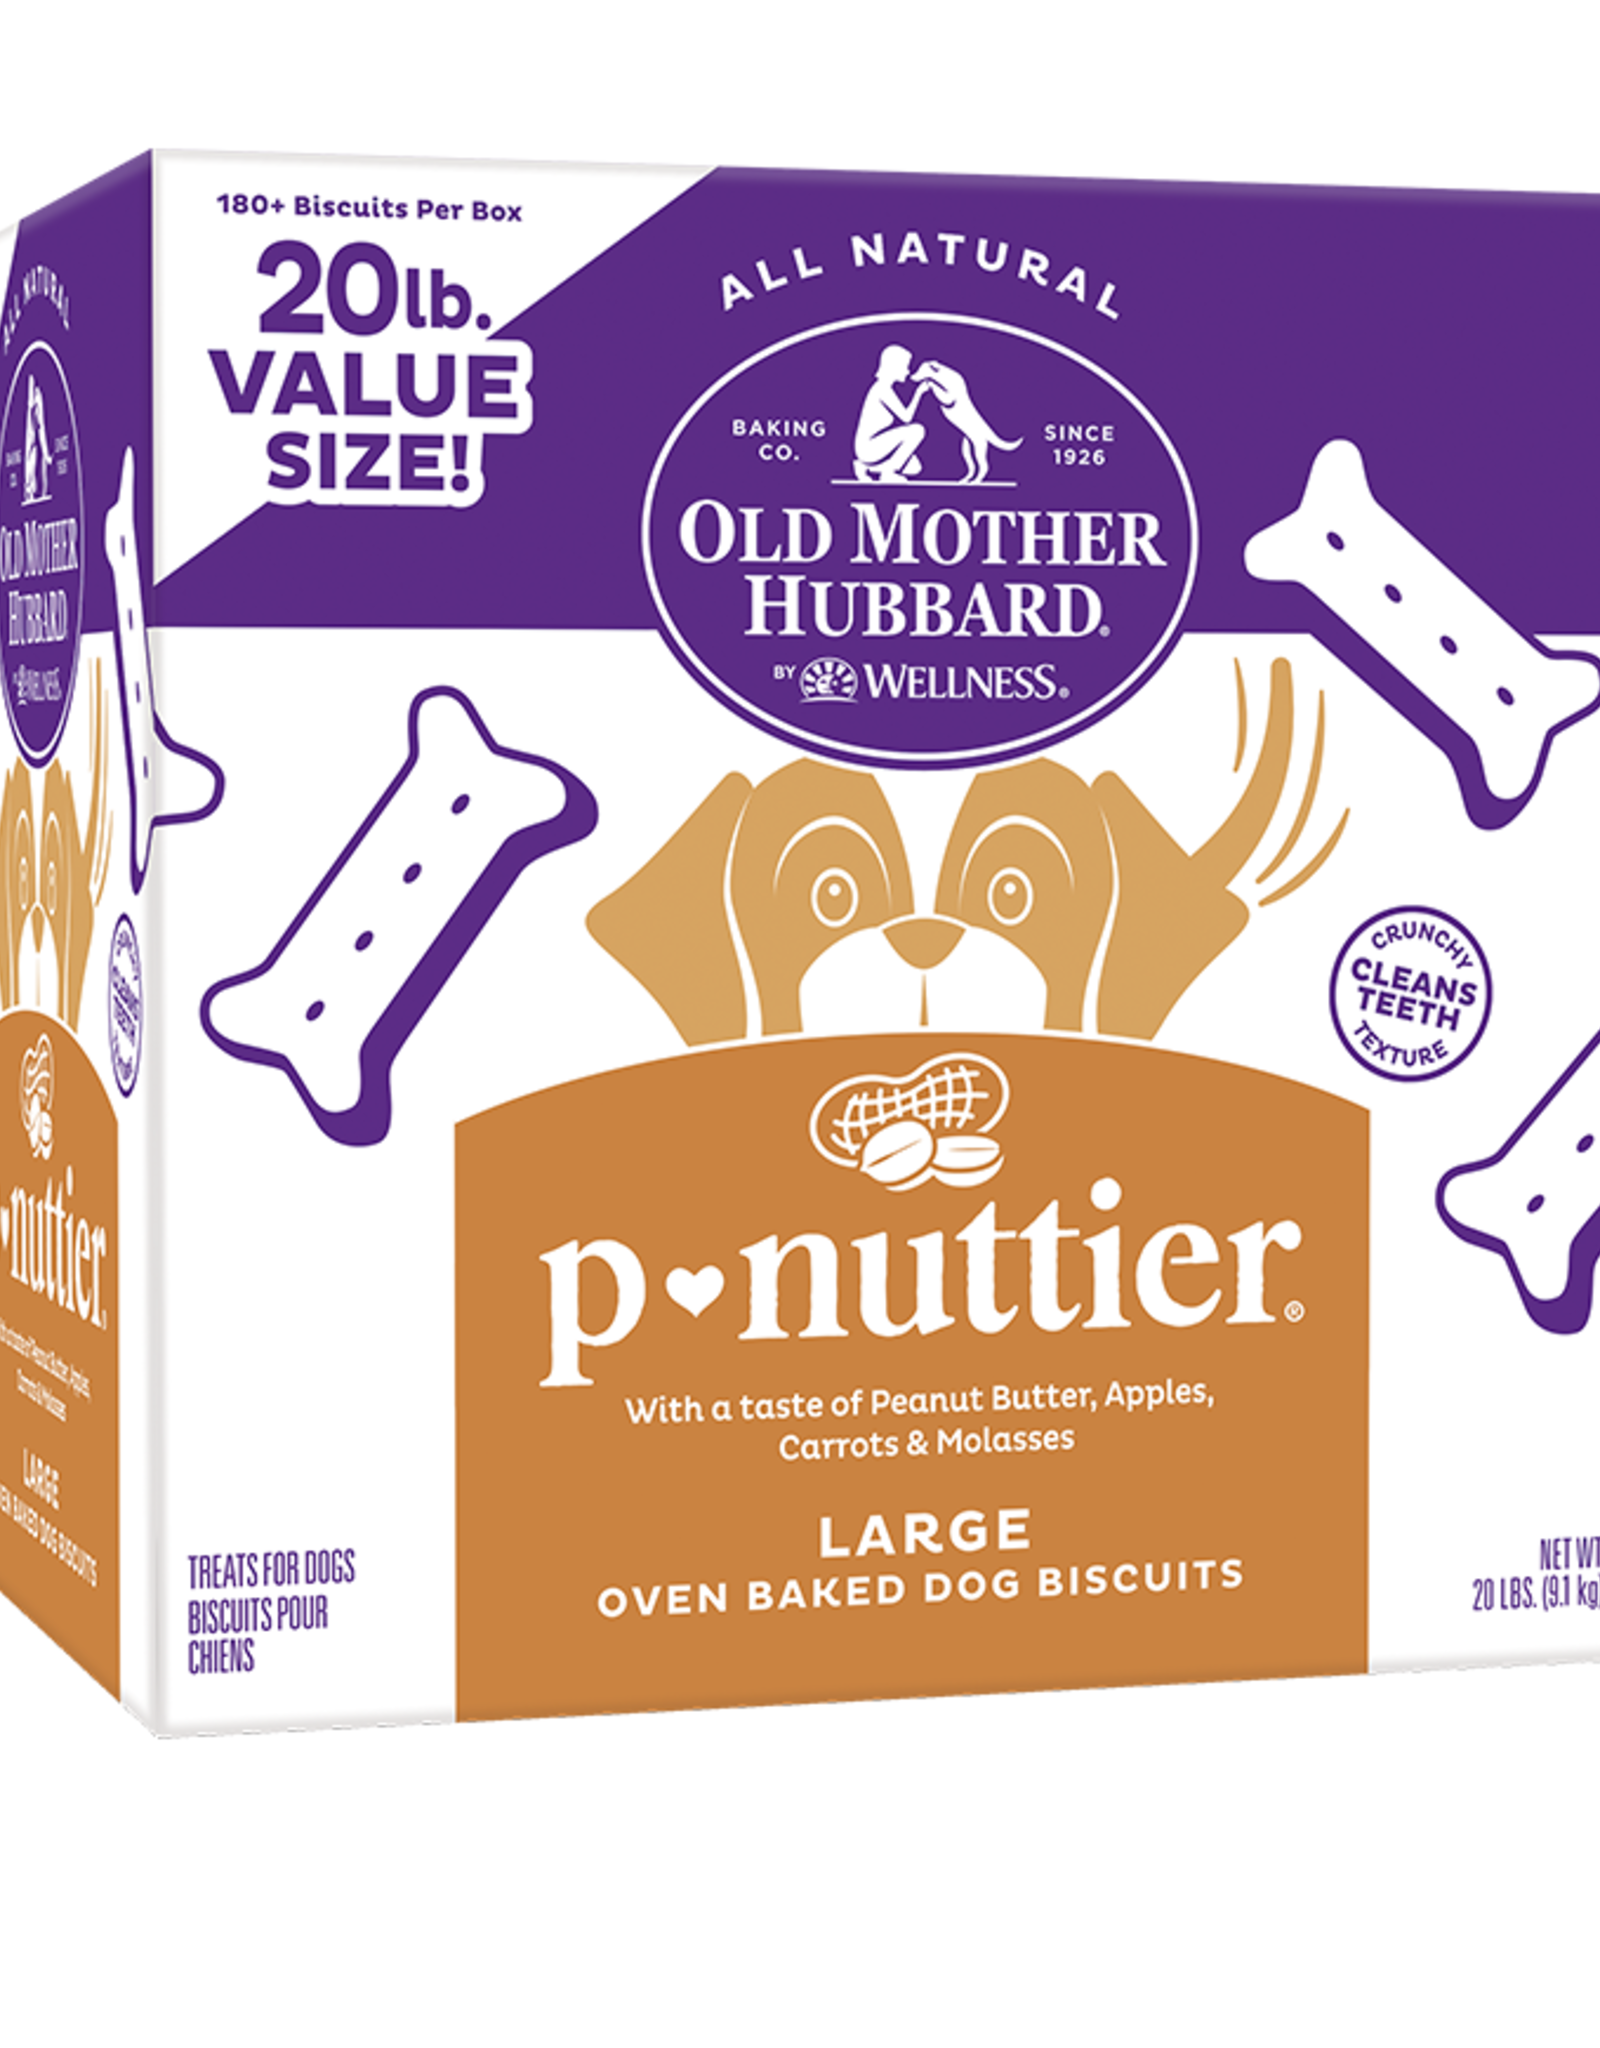 WELLPET LLC OLD MOTHER HUBBARD BISCUITS P-NUTTIER LARGE 20LB